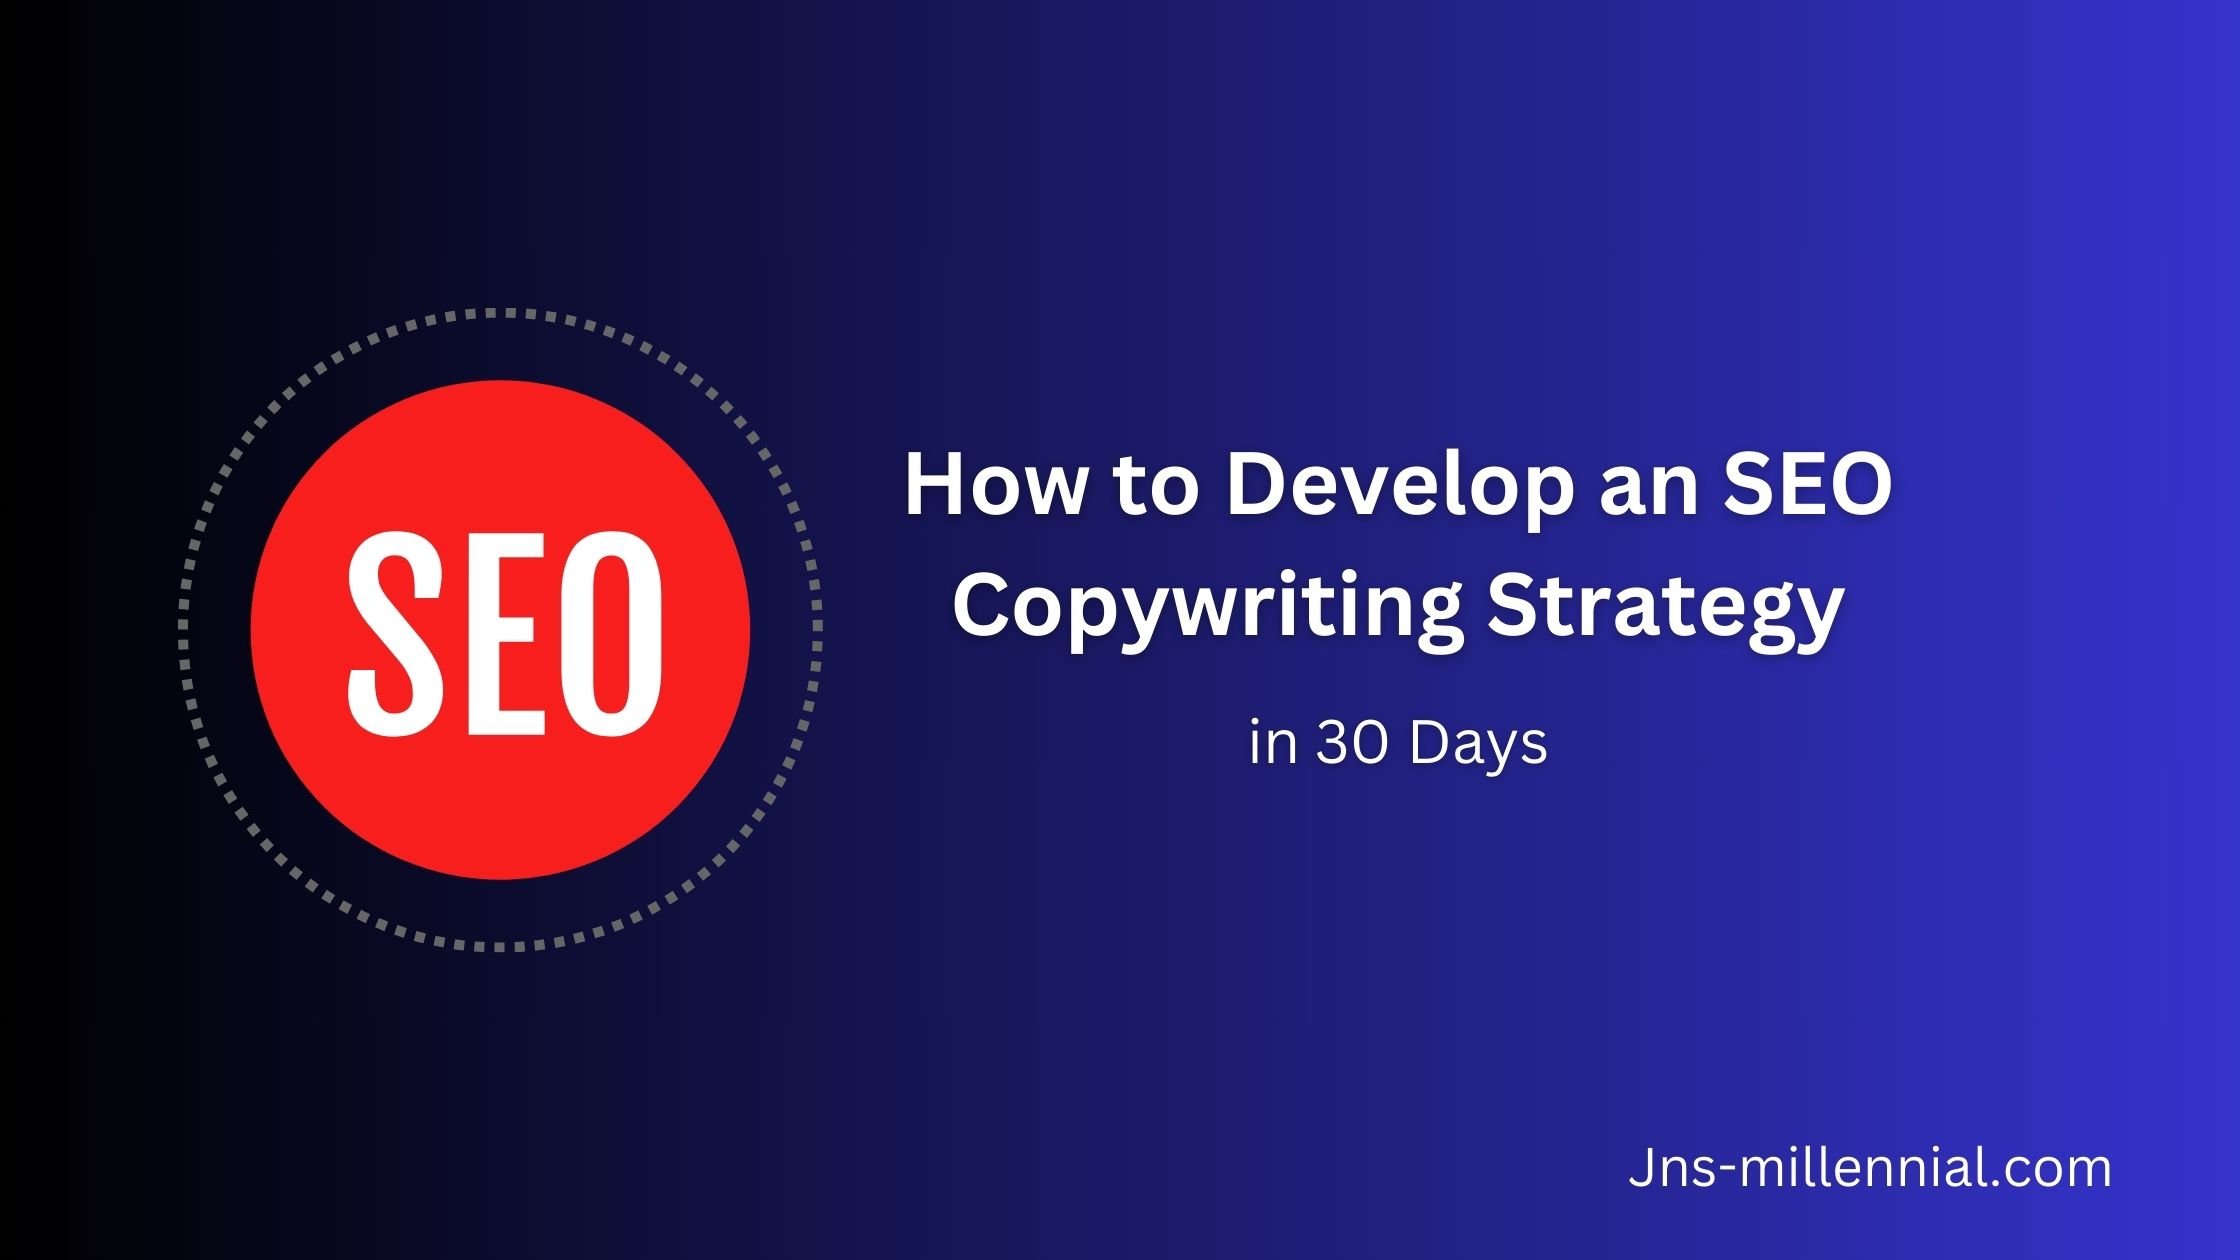 How to Develop an SEO Copywriting Strategy